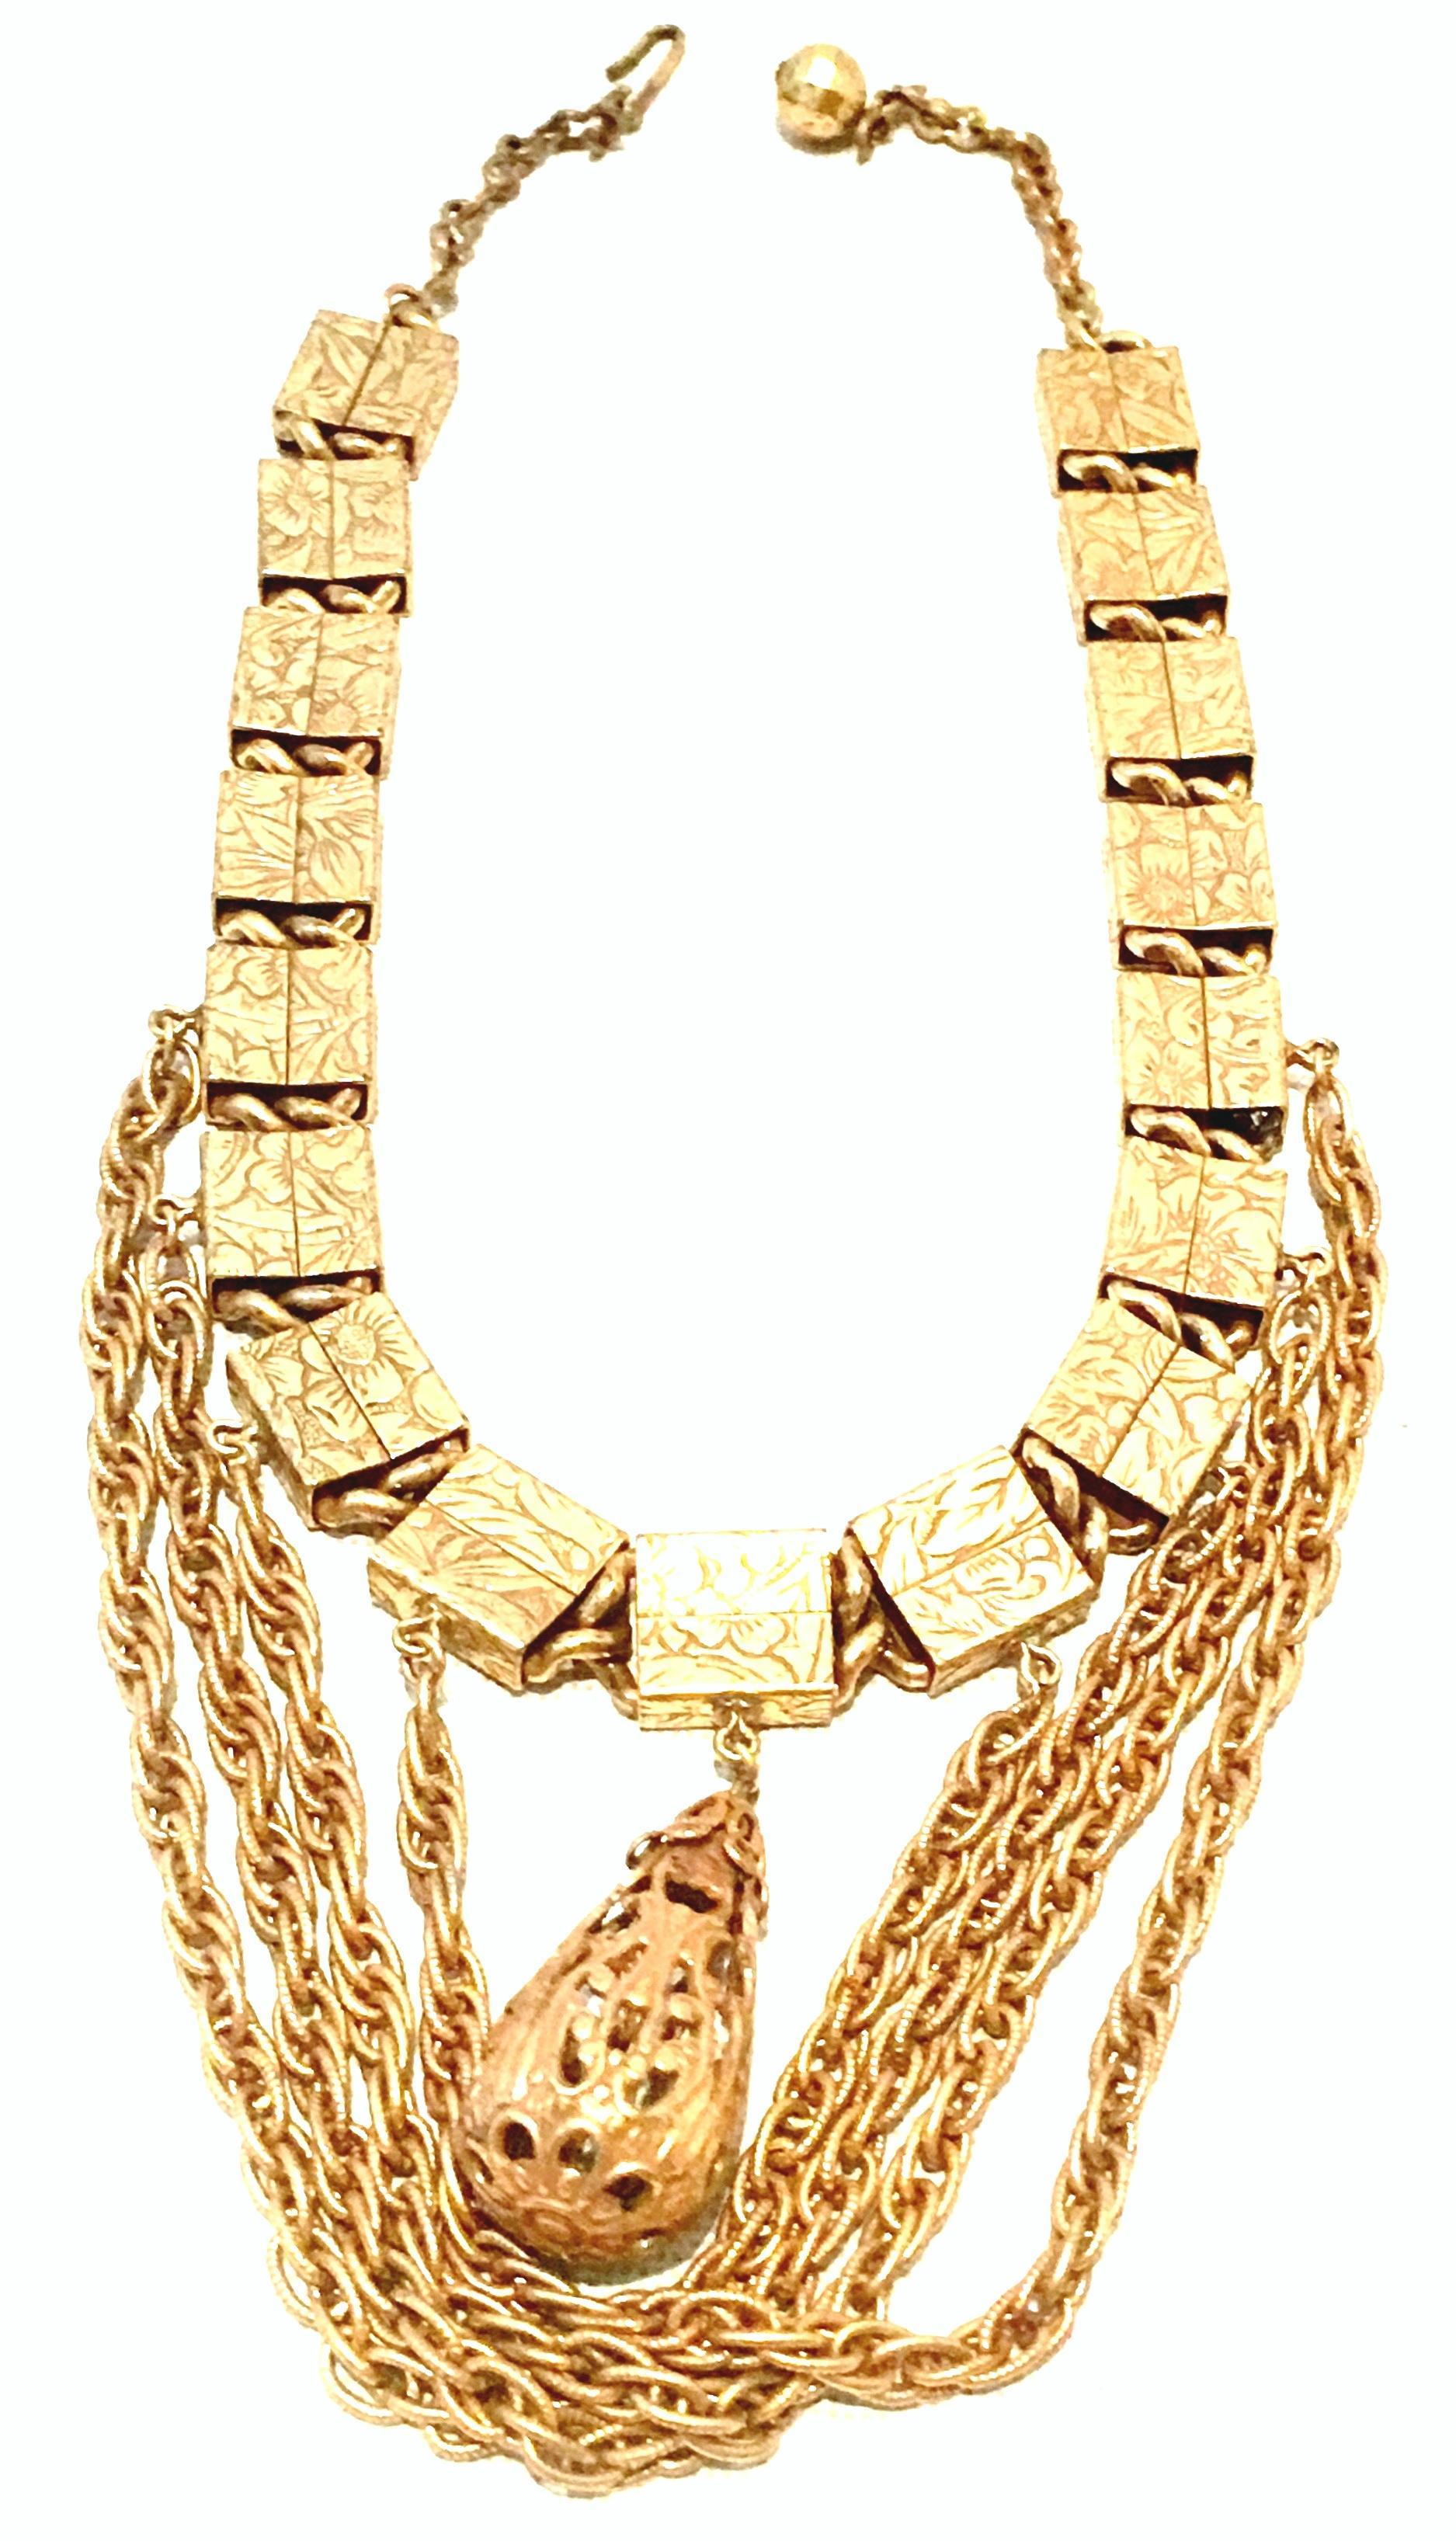 20th Century Art Nouveau Gold Book Chain Choker Style Necklace & Earrings S/3 For Sale 3